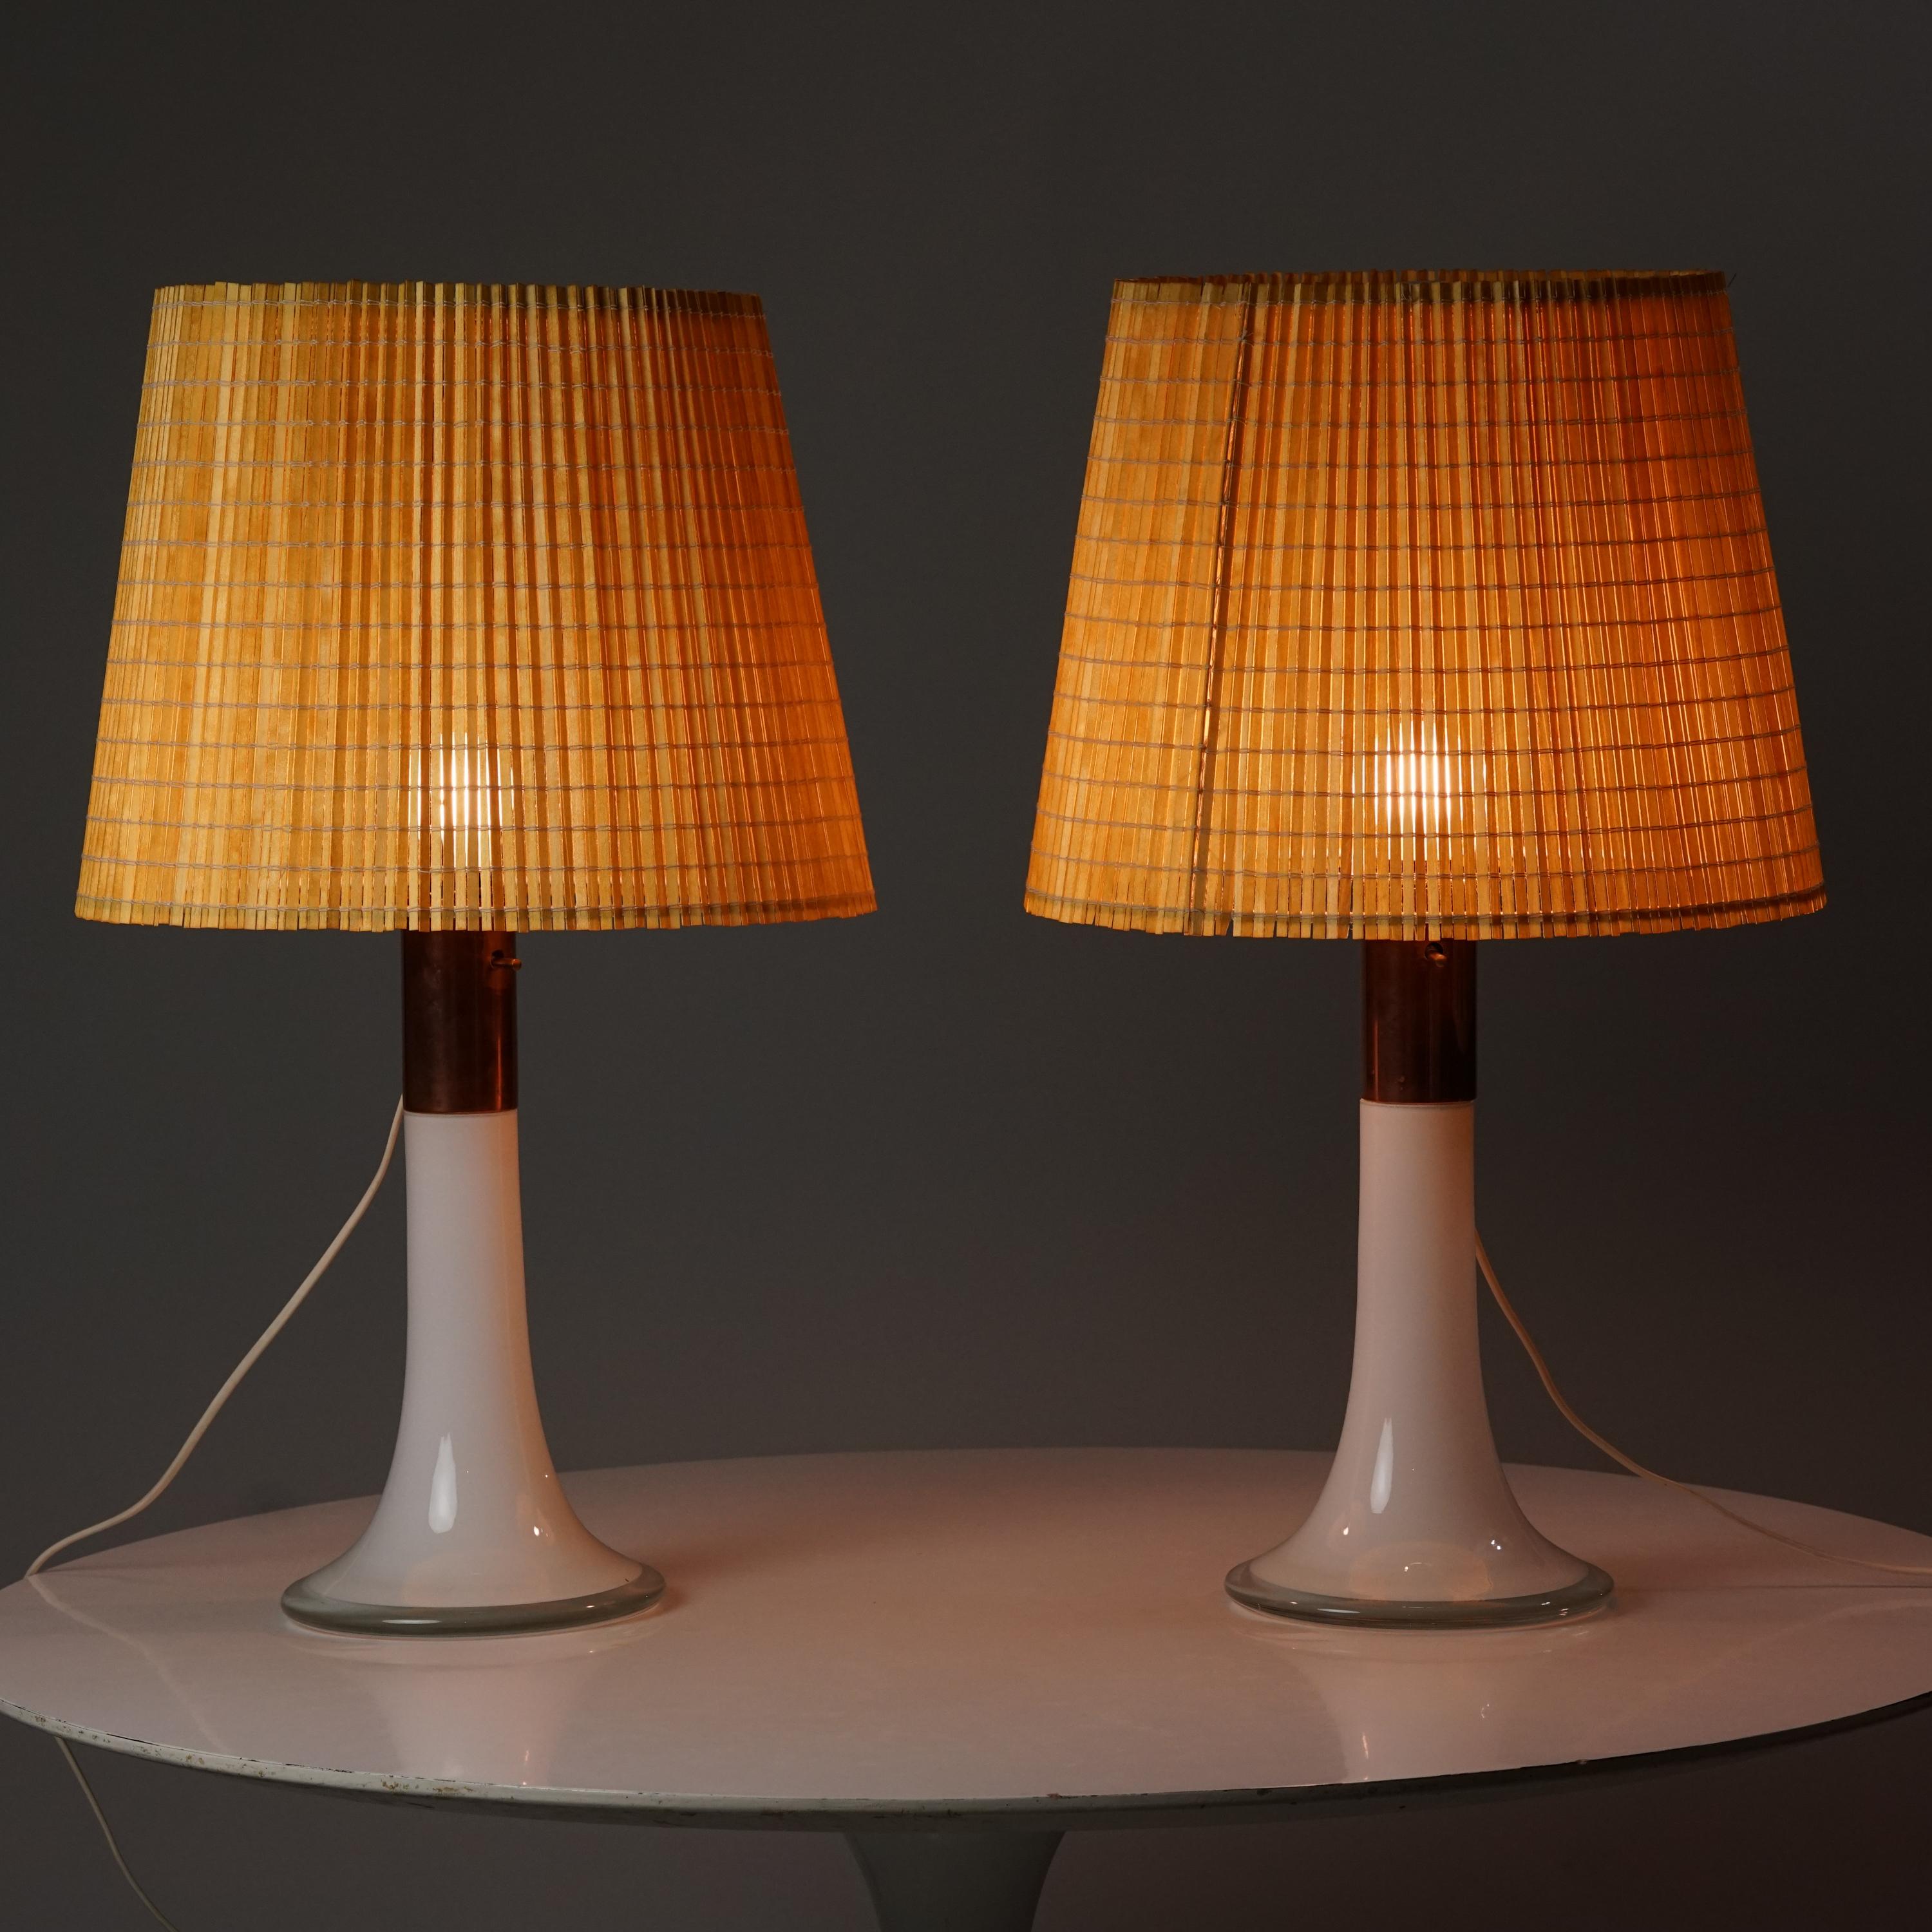 Pair of glass lamps, design by Lisa Johansson-Pape, manufactured by Orno Oy, 1960s. Glass frame, copper details, new wooden slat shades. Good vintage condition, minor patina consistent with age and use. 

Lisa Johansson-Pape is one of the most